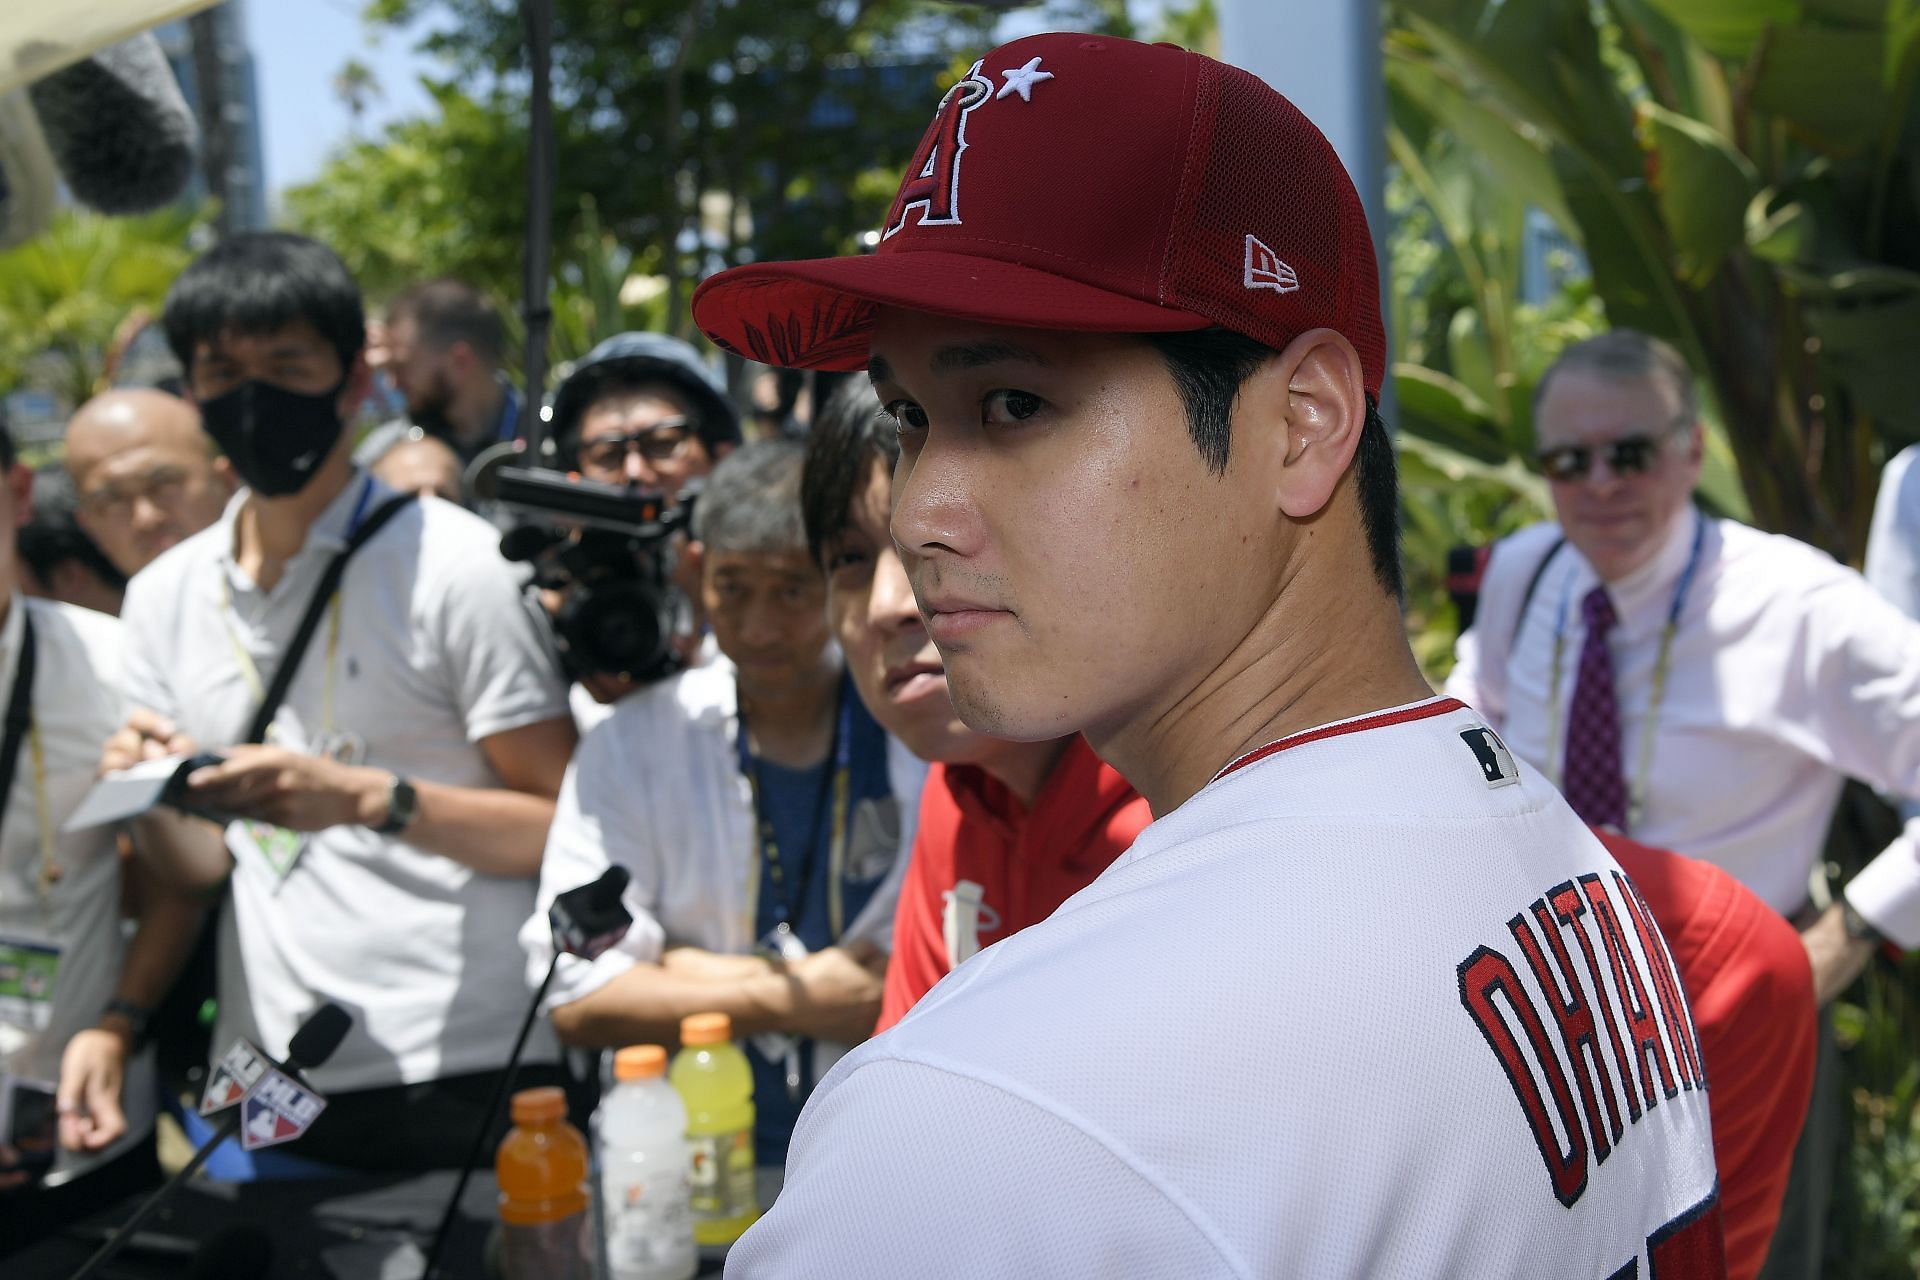 Ohtani enters play with an ERA of 2.38 and a batting averge of .258.